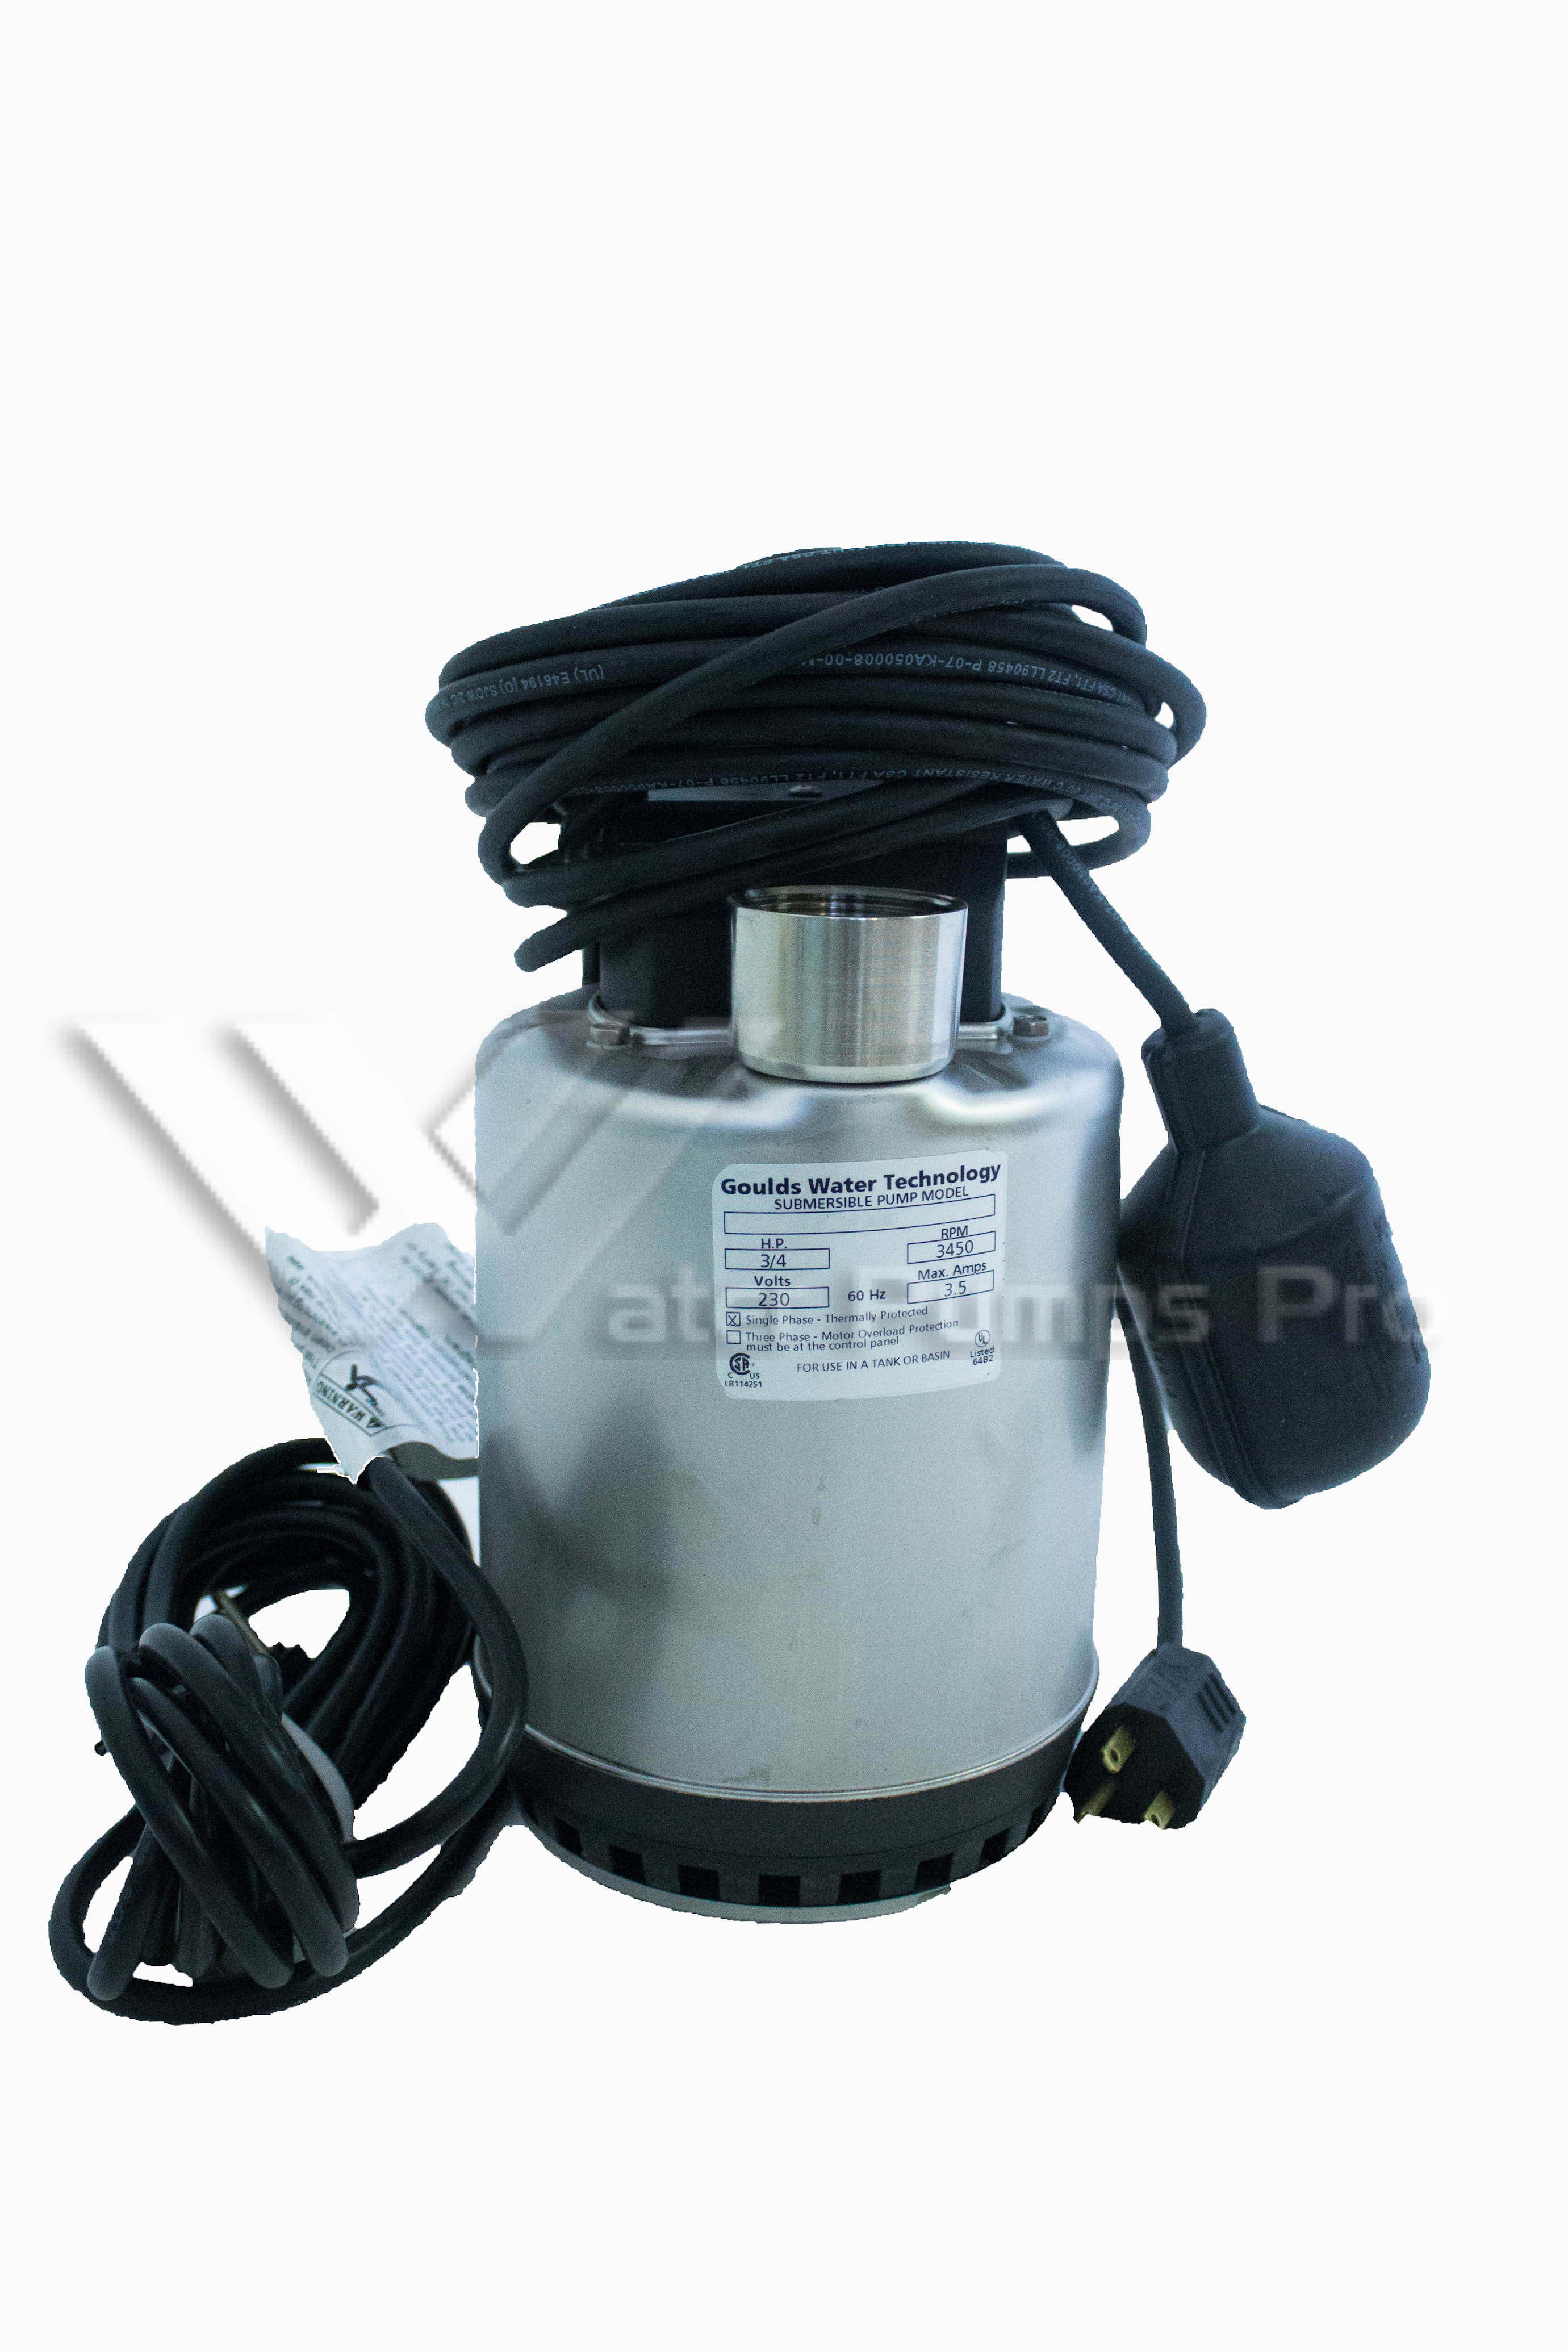 Goulds LSP0311A 1/3 HP 115V- Submersible Sump Pump